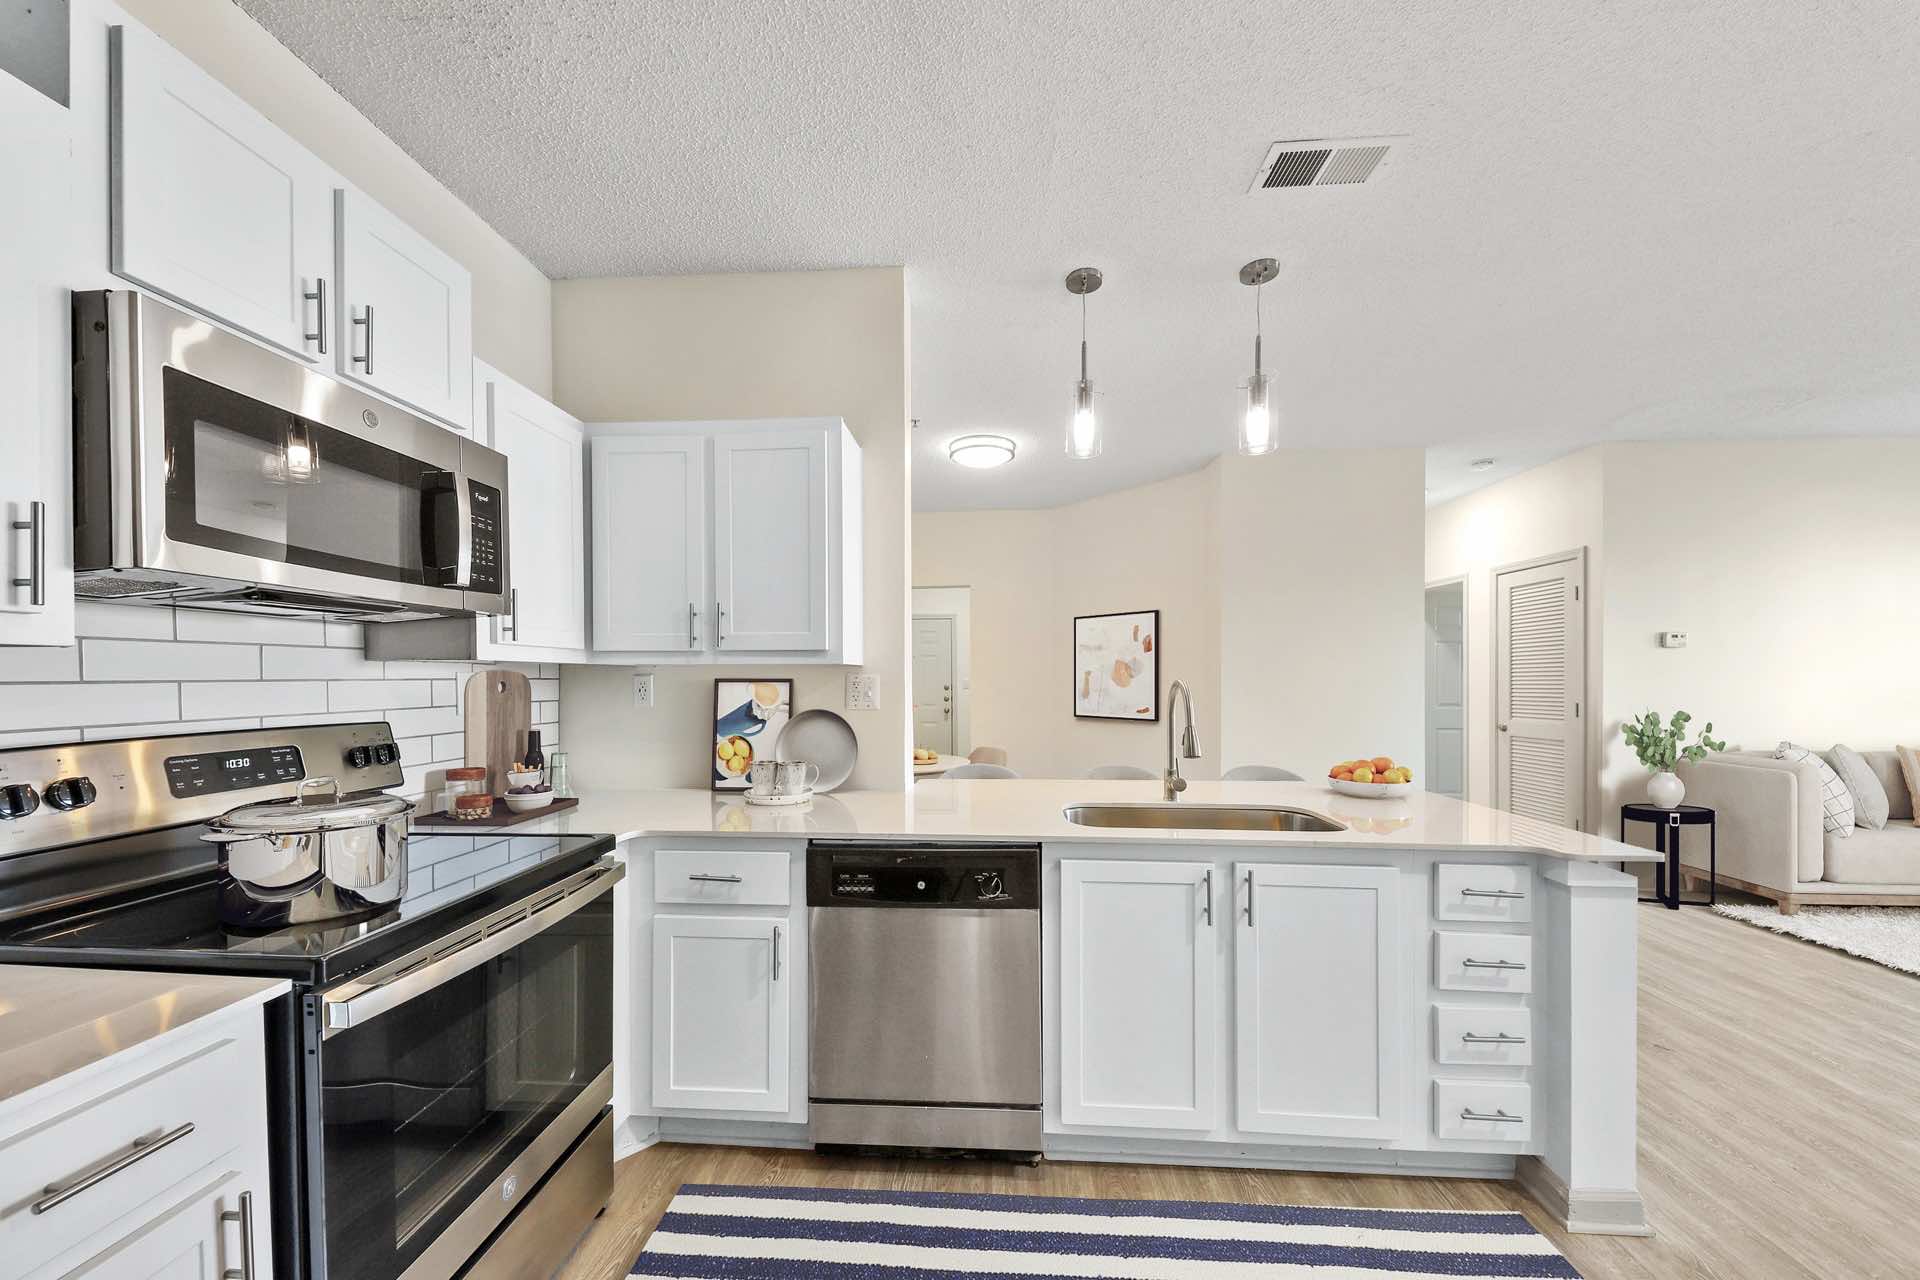 updated kitchen with stainless steel appliances and wood-style flooring leading to open floor plan layout